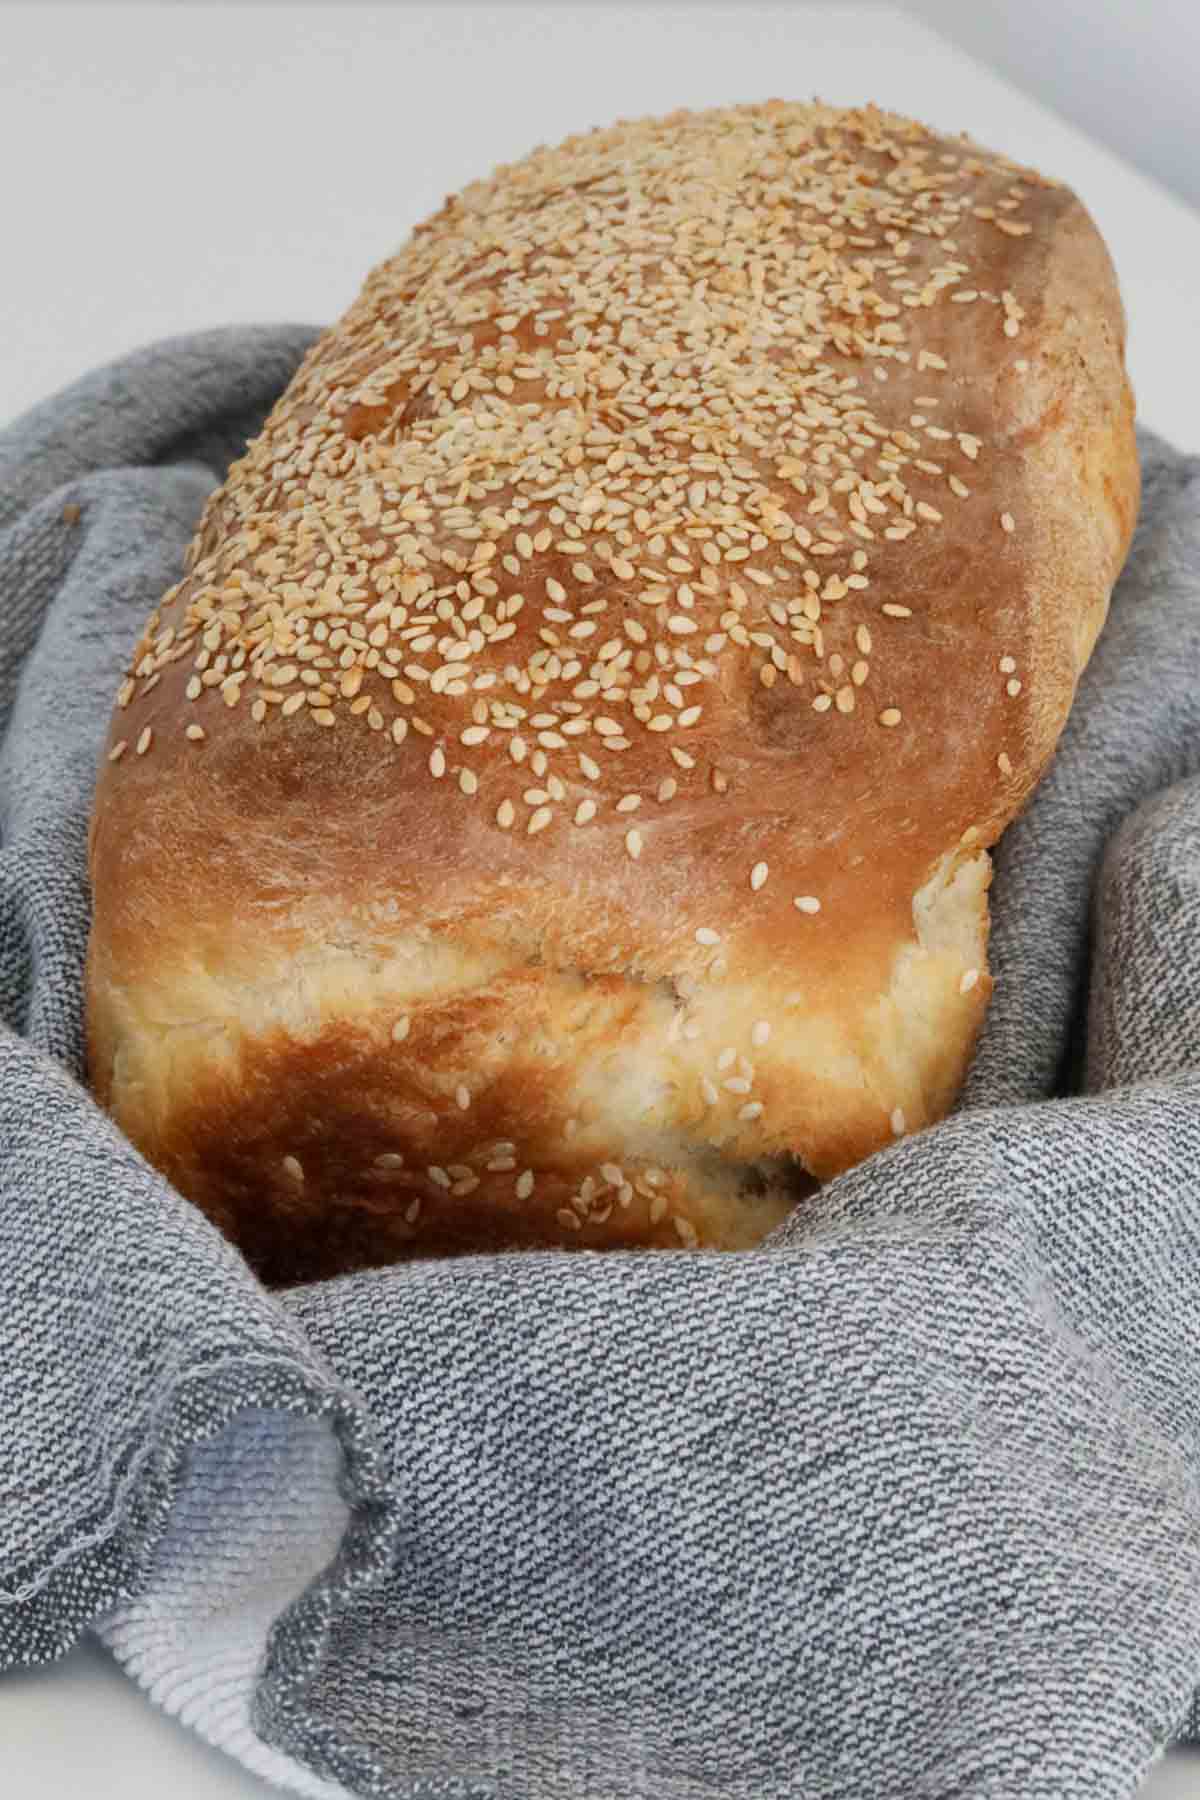 A homemade white bread loaf.